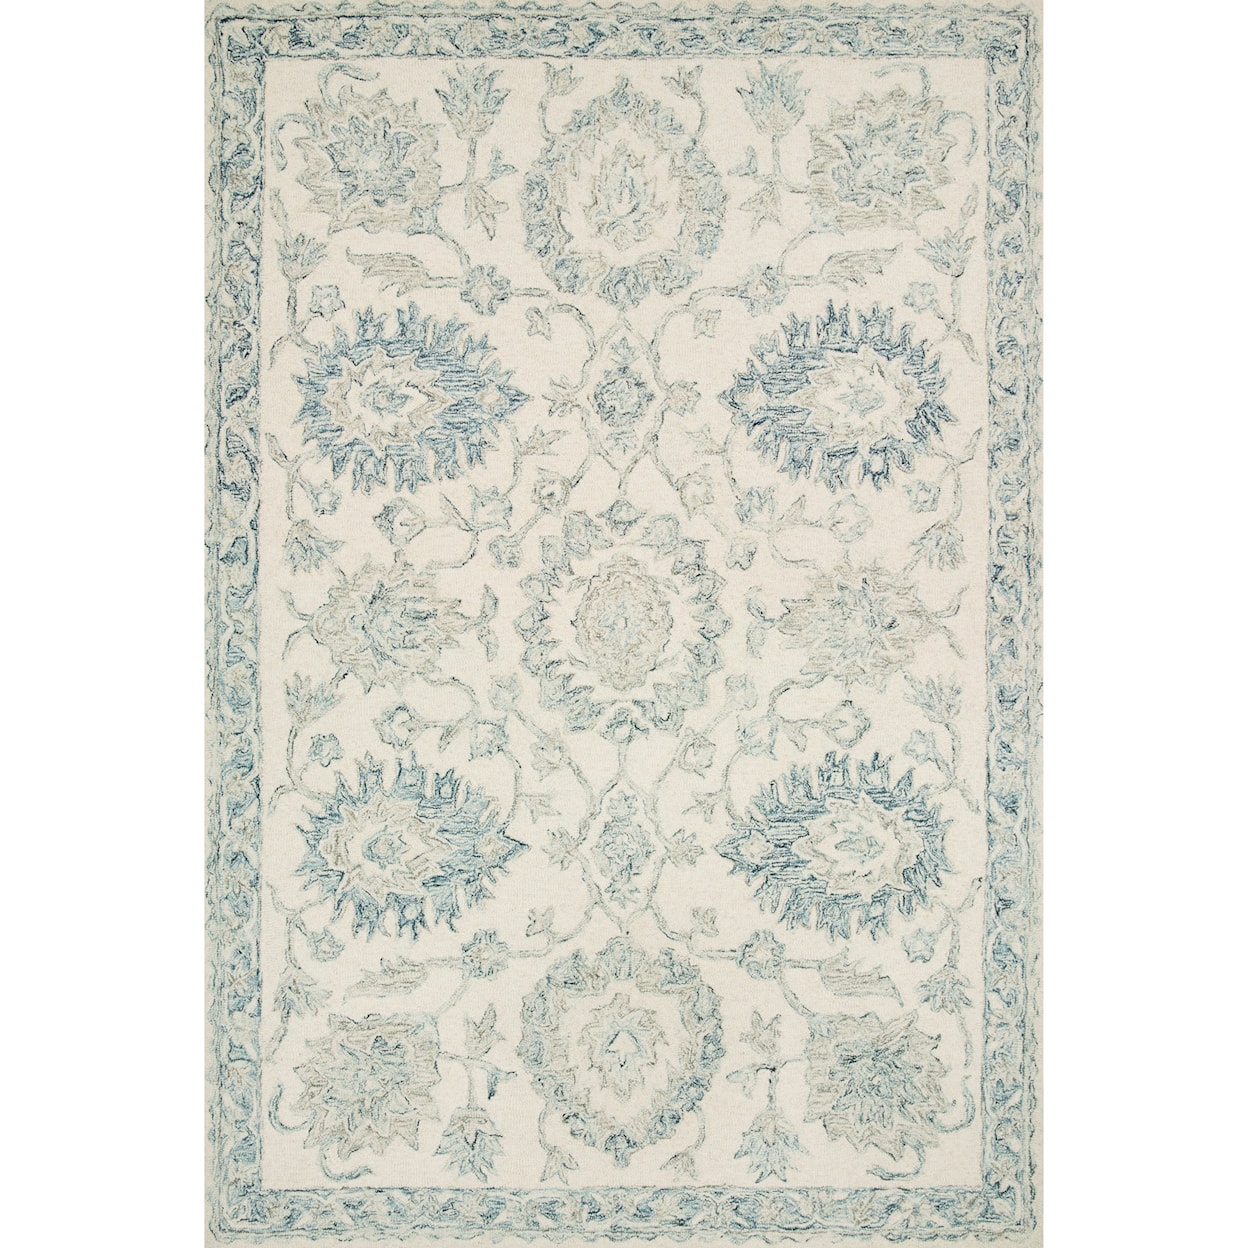 Loloi Rugs Norabel 8'6" x 12' Ivory / Blue Rug